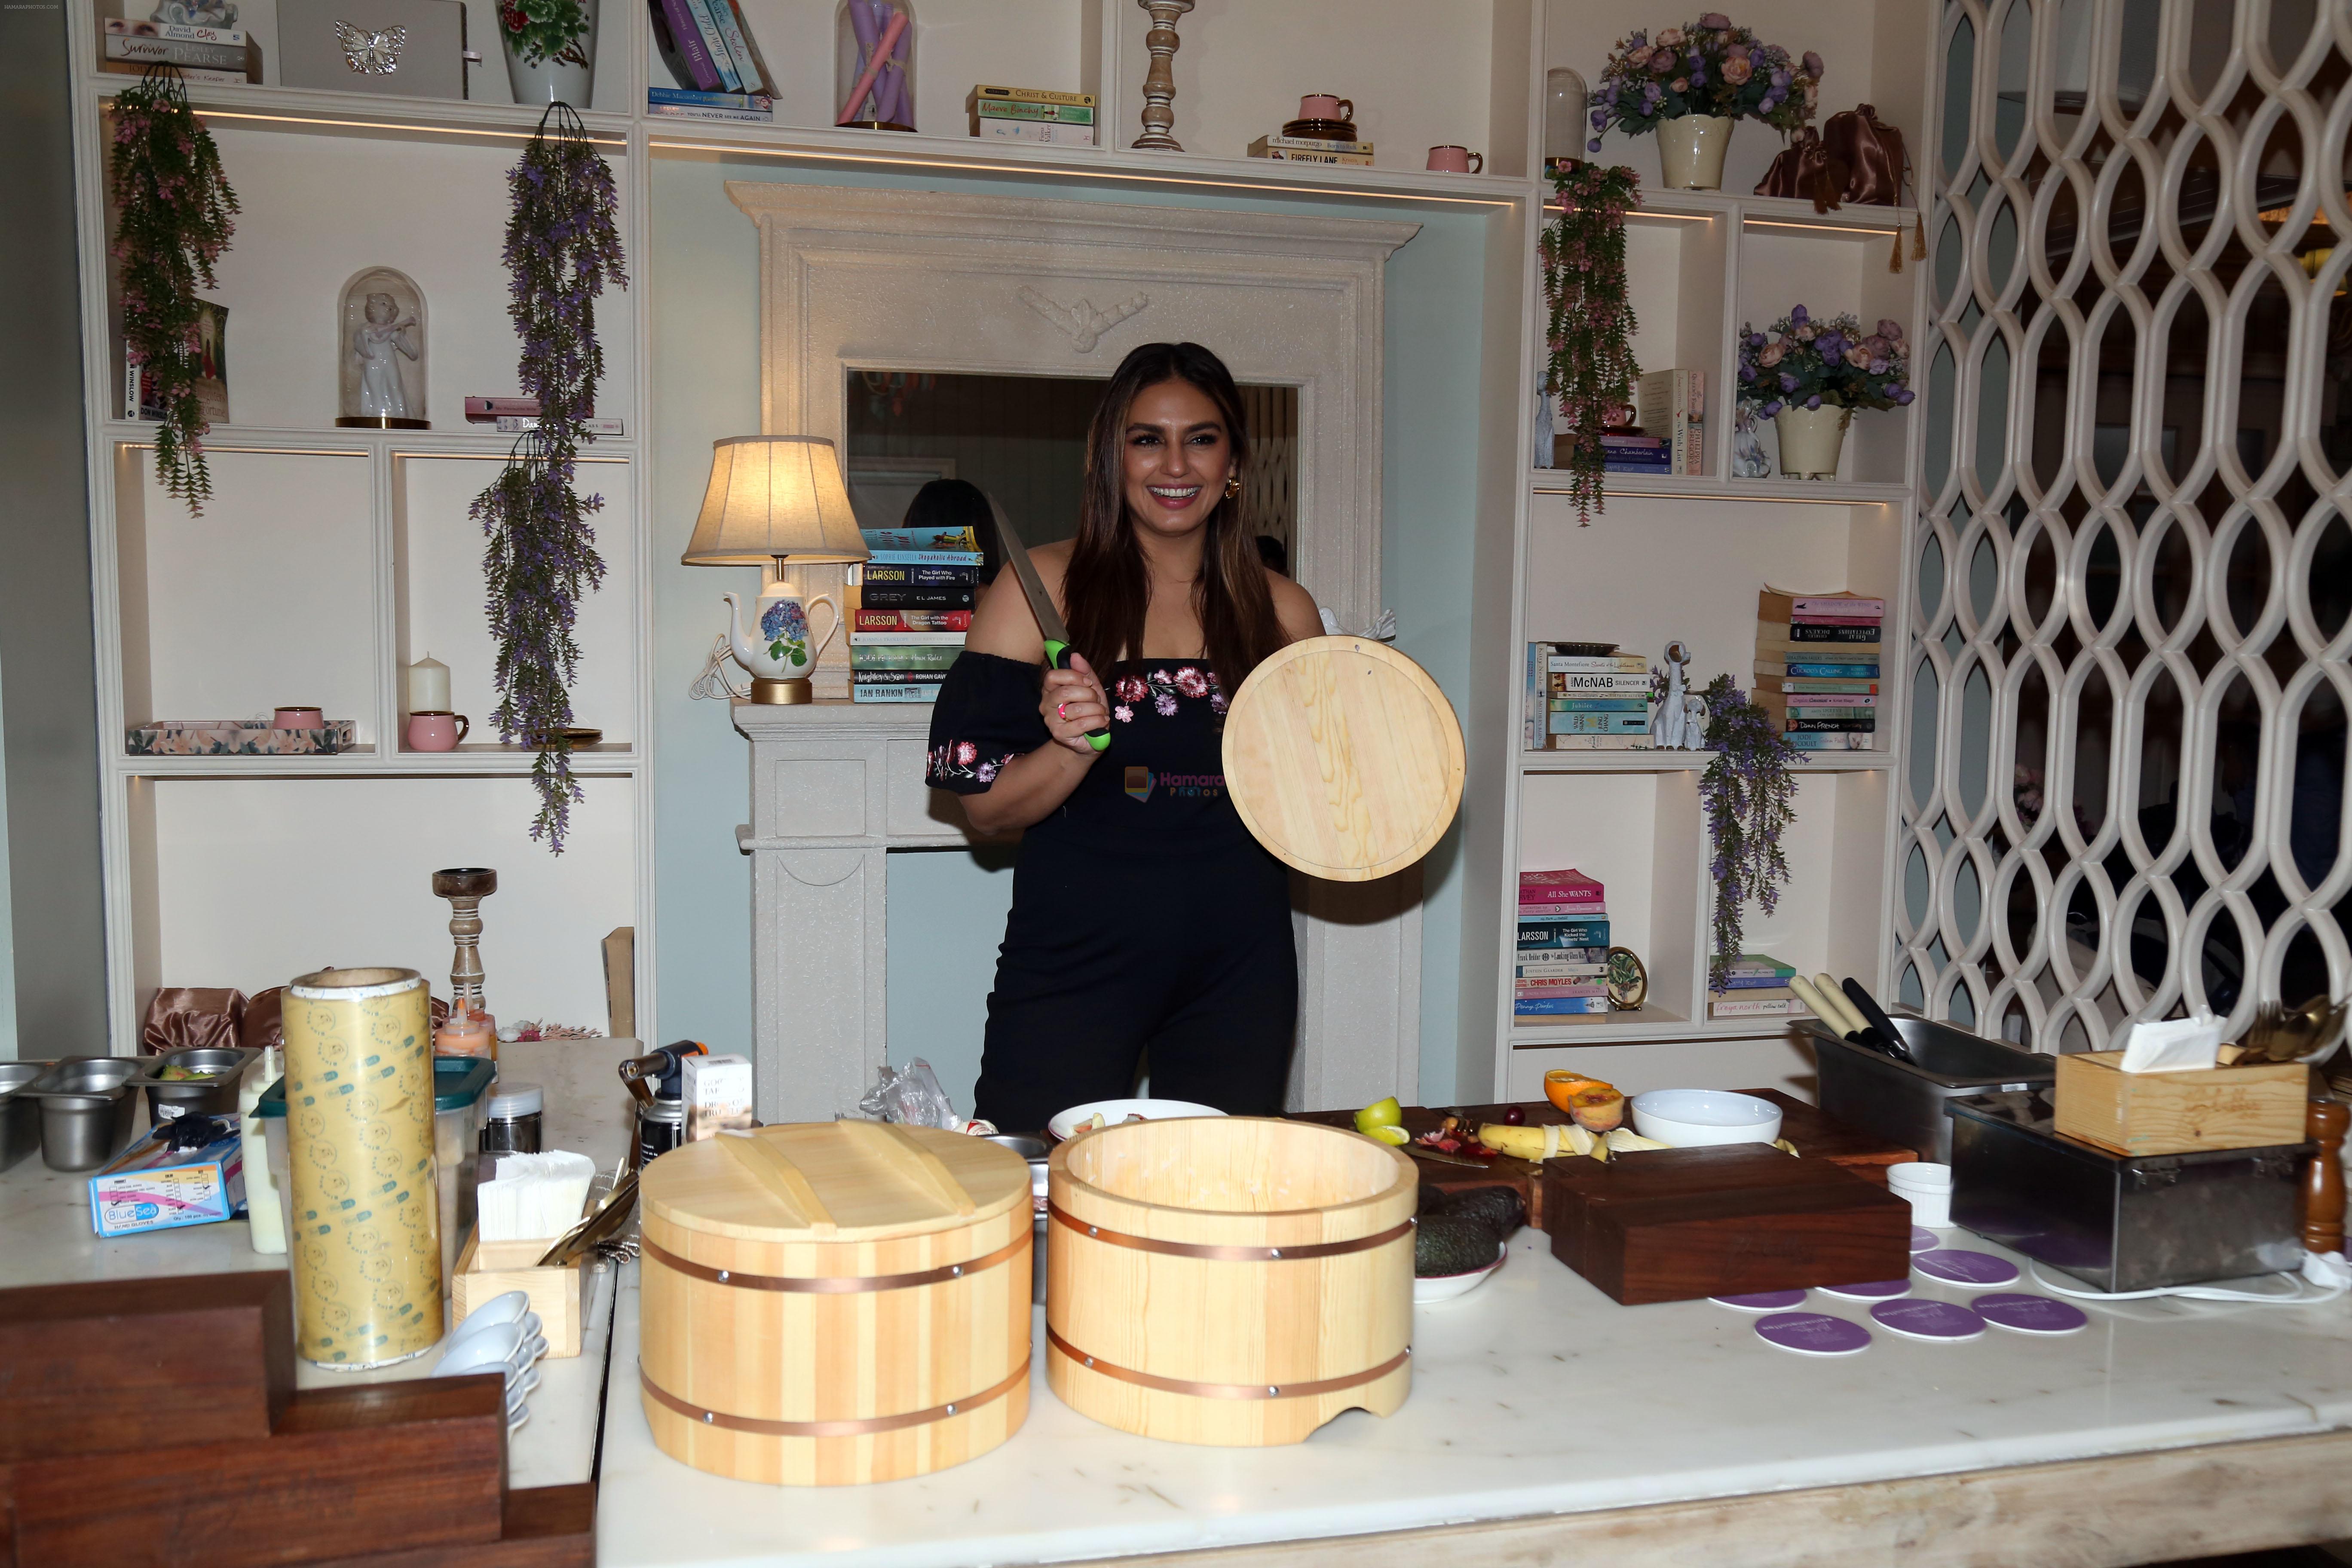 Huma Qureshi poses for camera promoting Fun Cooking Collaboration with Gary Mehigan on 5 July 2023